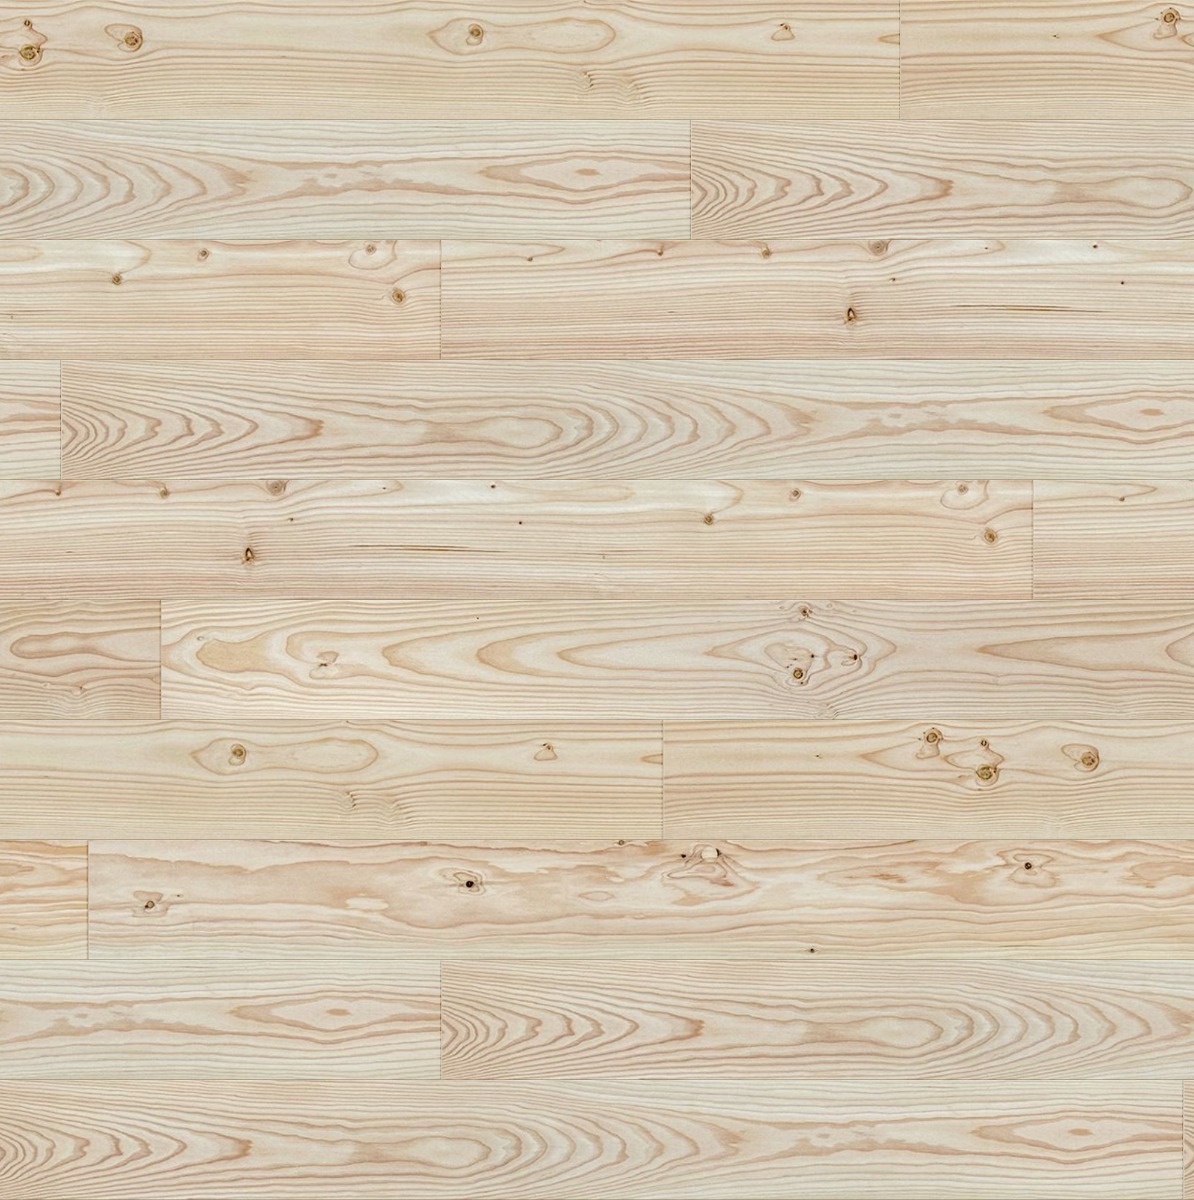 A seamless wood texture with douglas 200 select boards arranged in a Staggered pattern